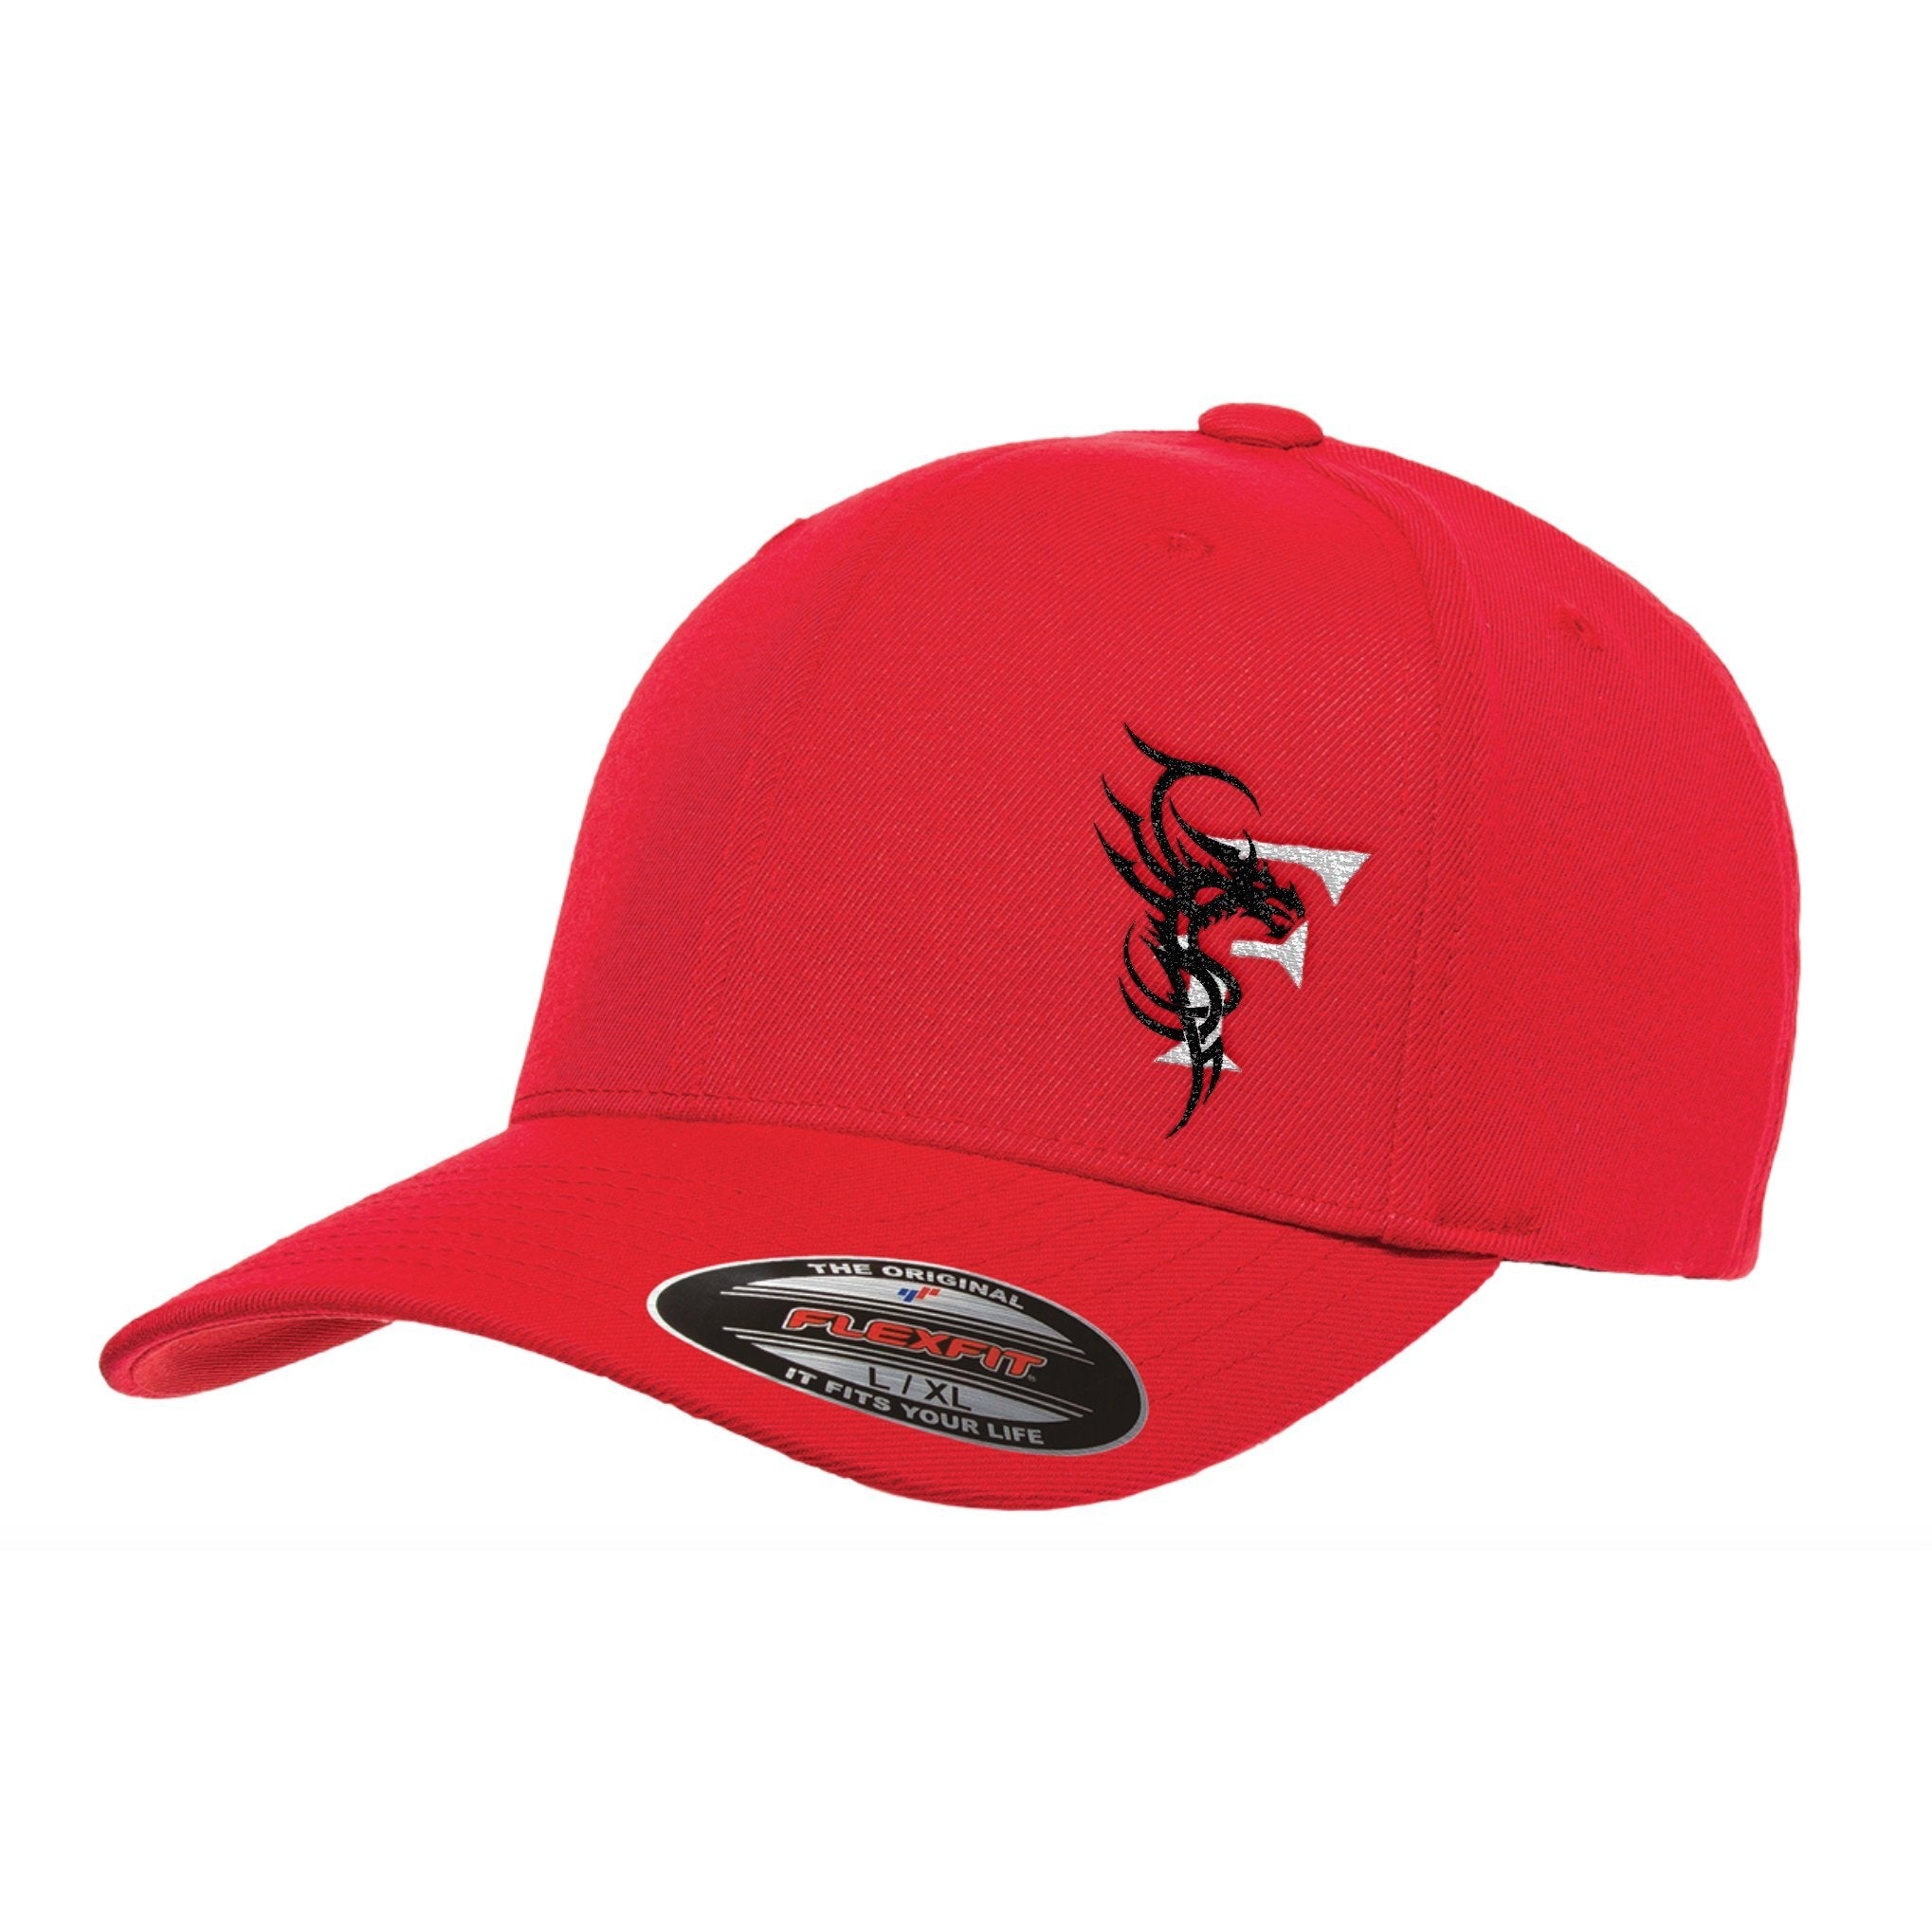 Red Fitted Hat with Curved Brim with Black Welsh Dragon – Dragon's Lair Gym